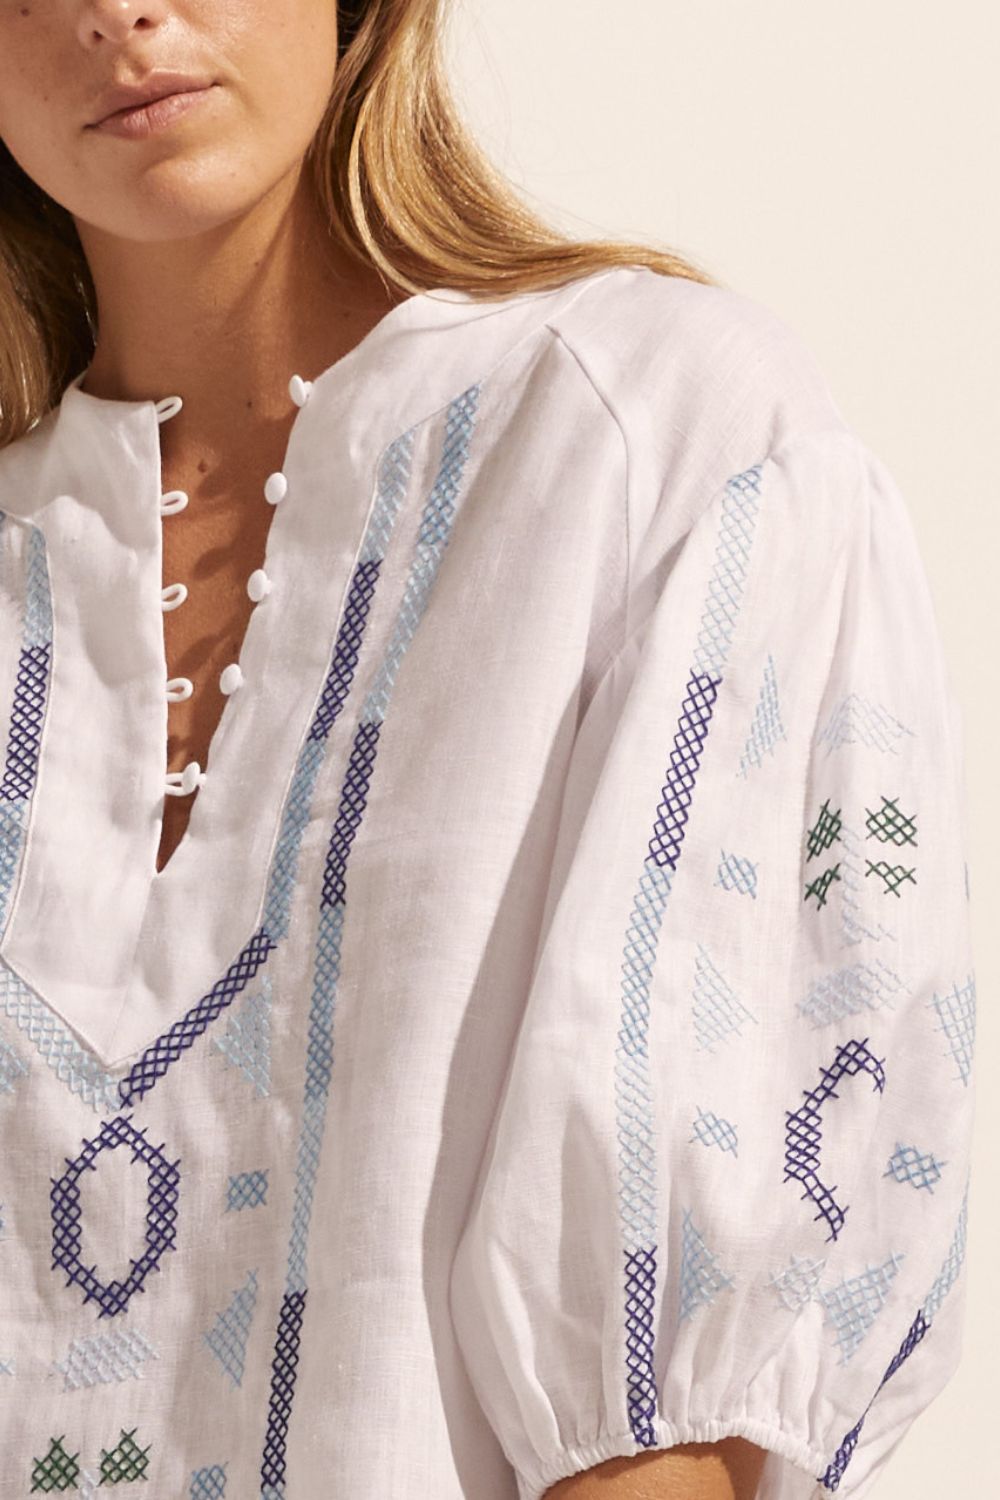 blue and white, top, mid length sleeve, button down neckline, embroidered, close up image